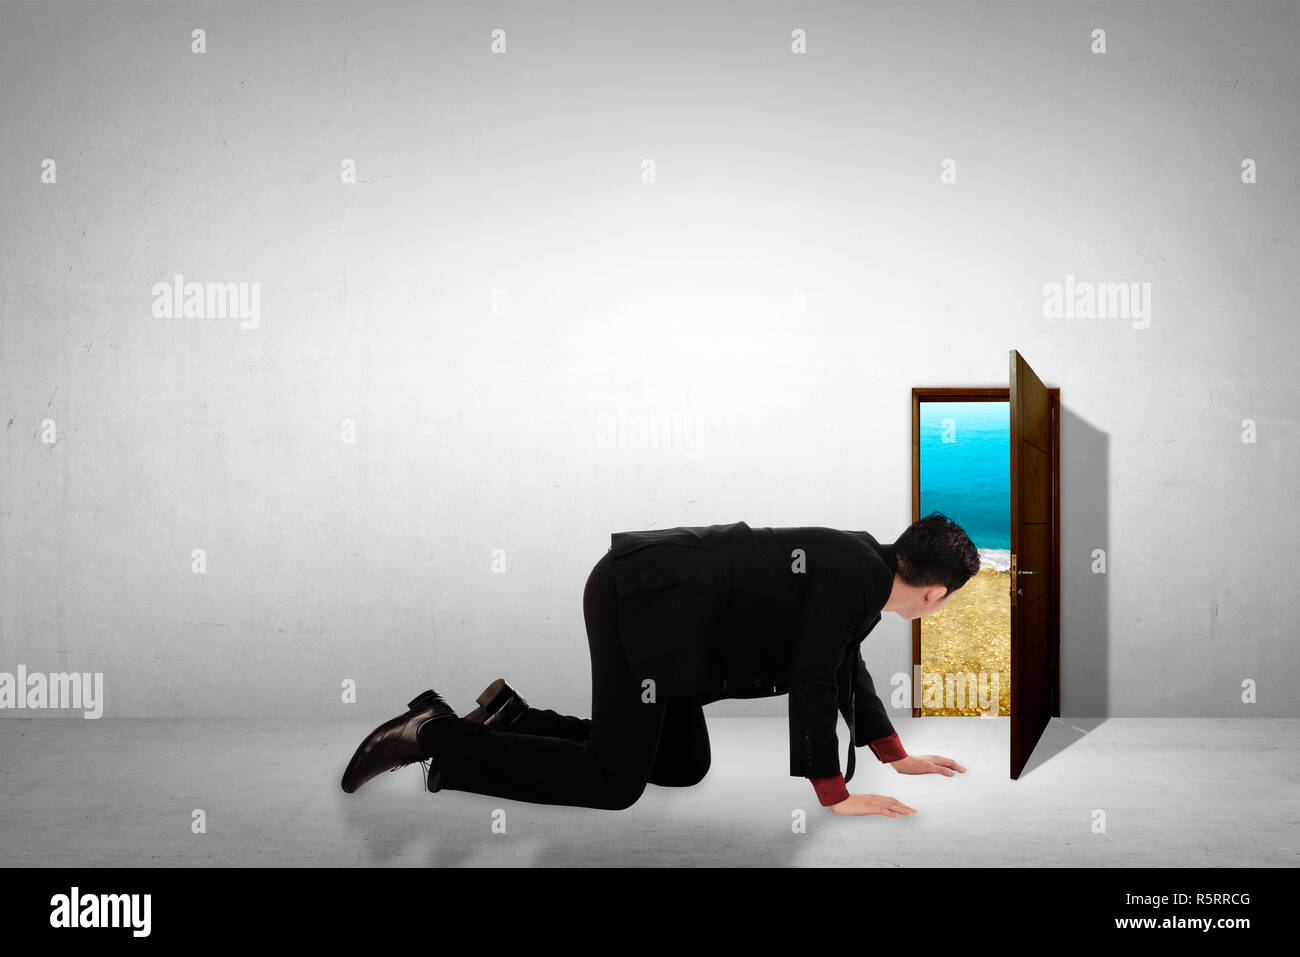 Business man take peek on small door through beach. Vacation opportunity concept Stock Photo